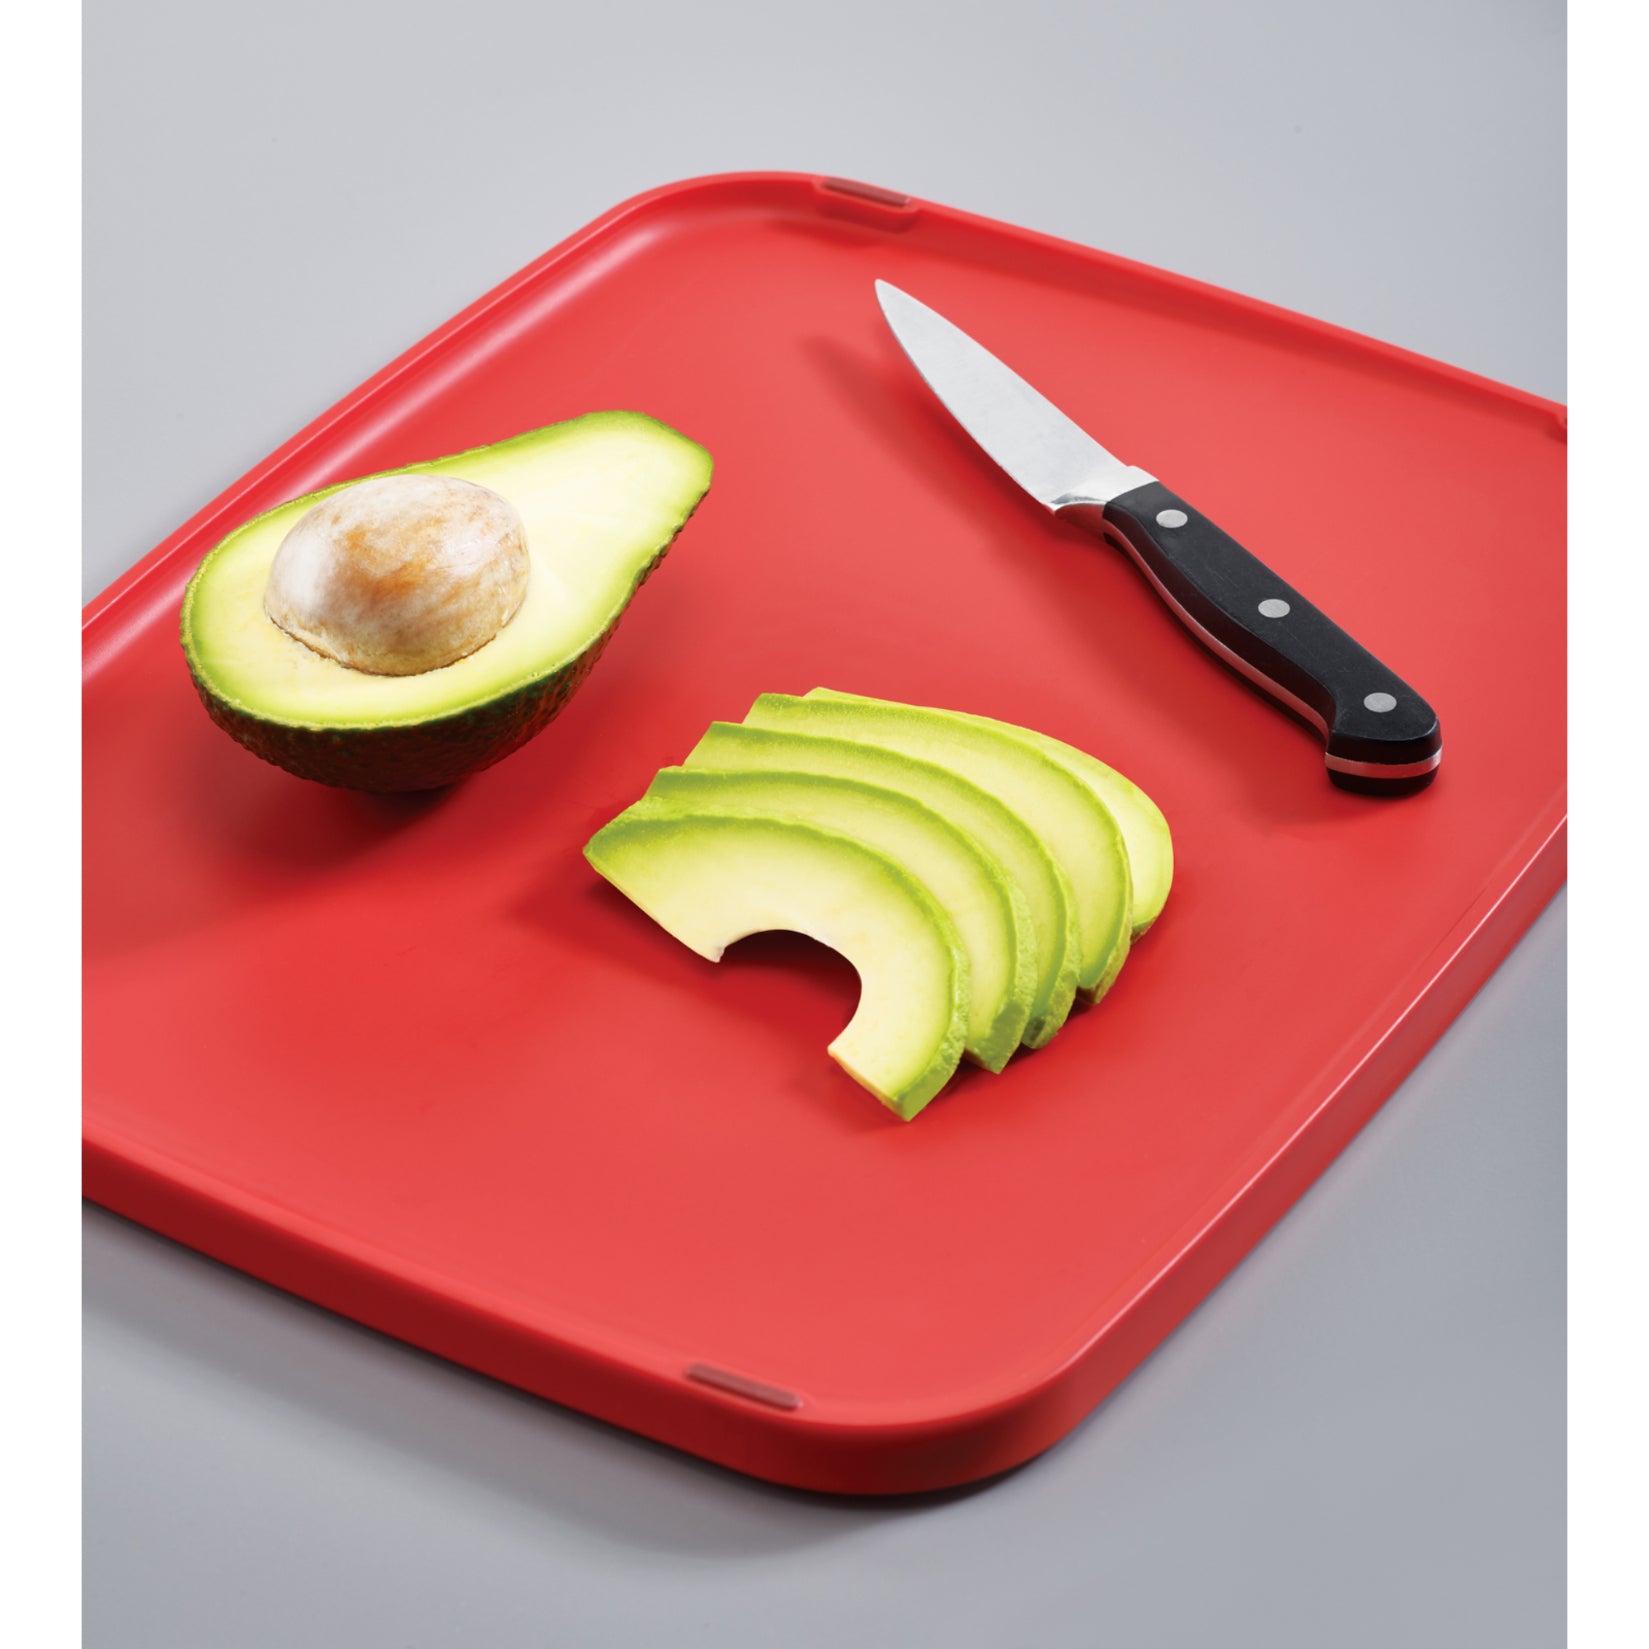 Duo Multi-function Chopping Board - Red